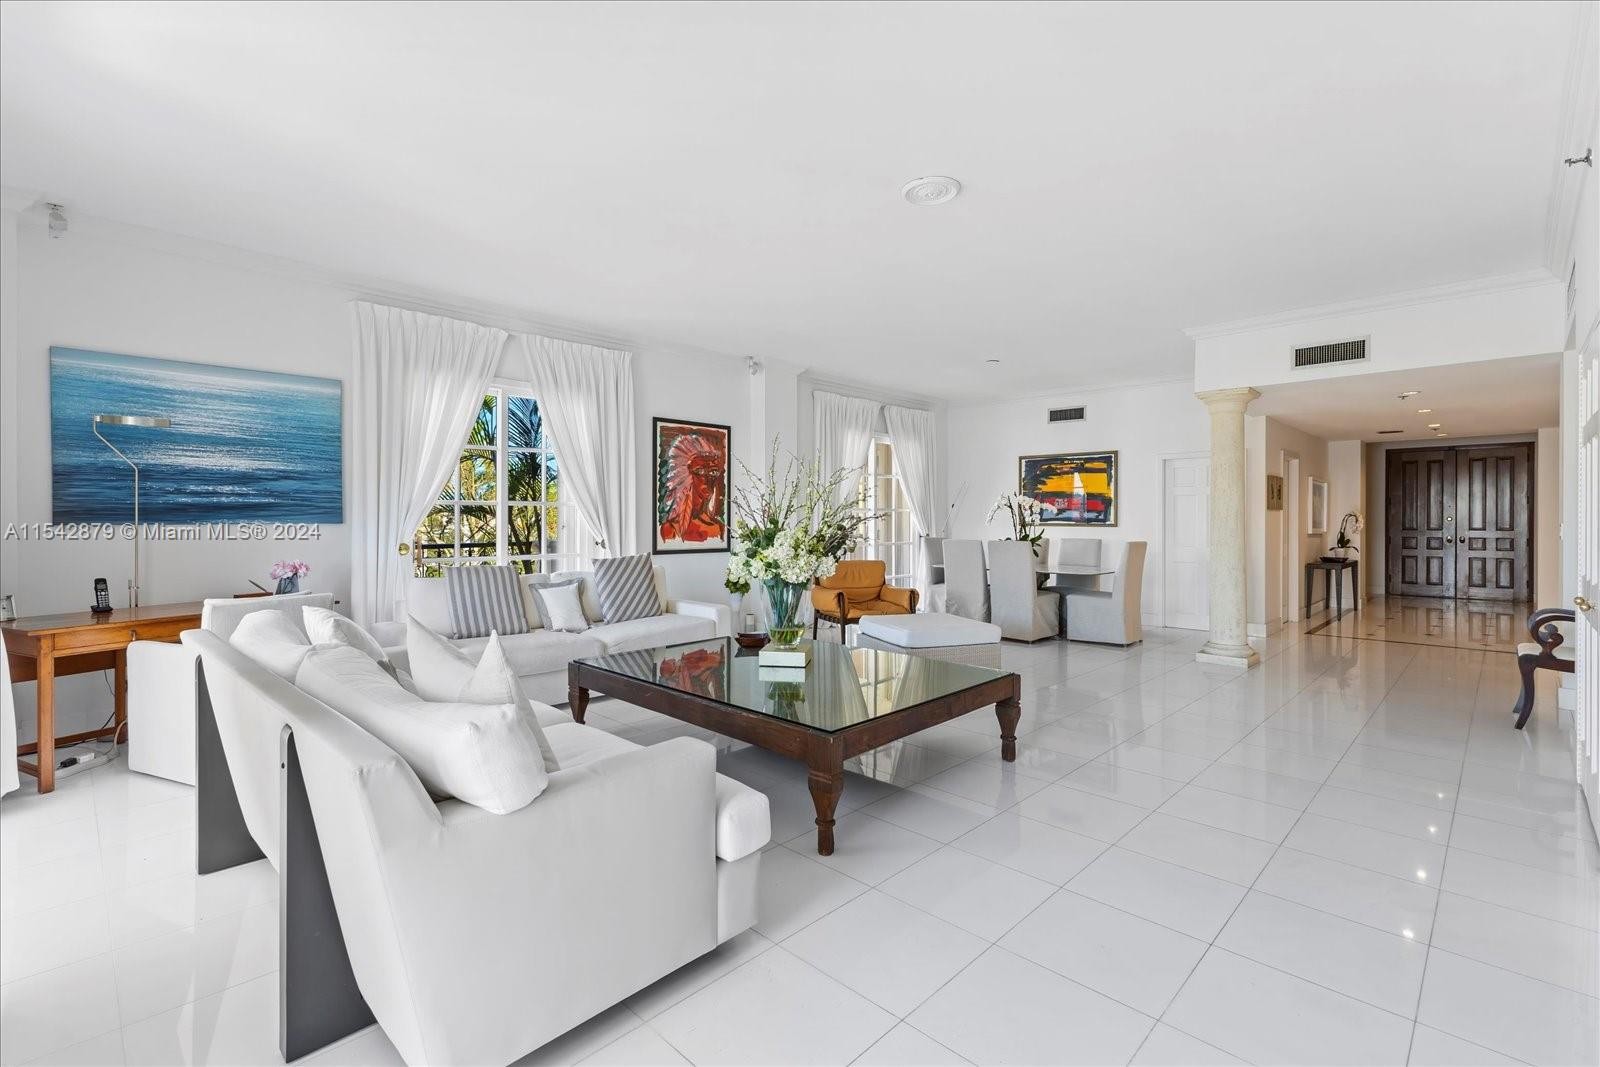 6. Fisher Island Dr